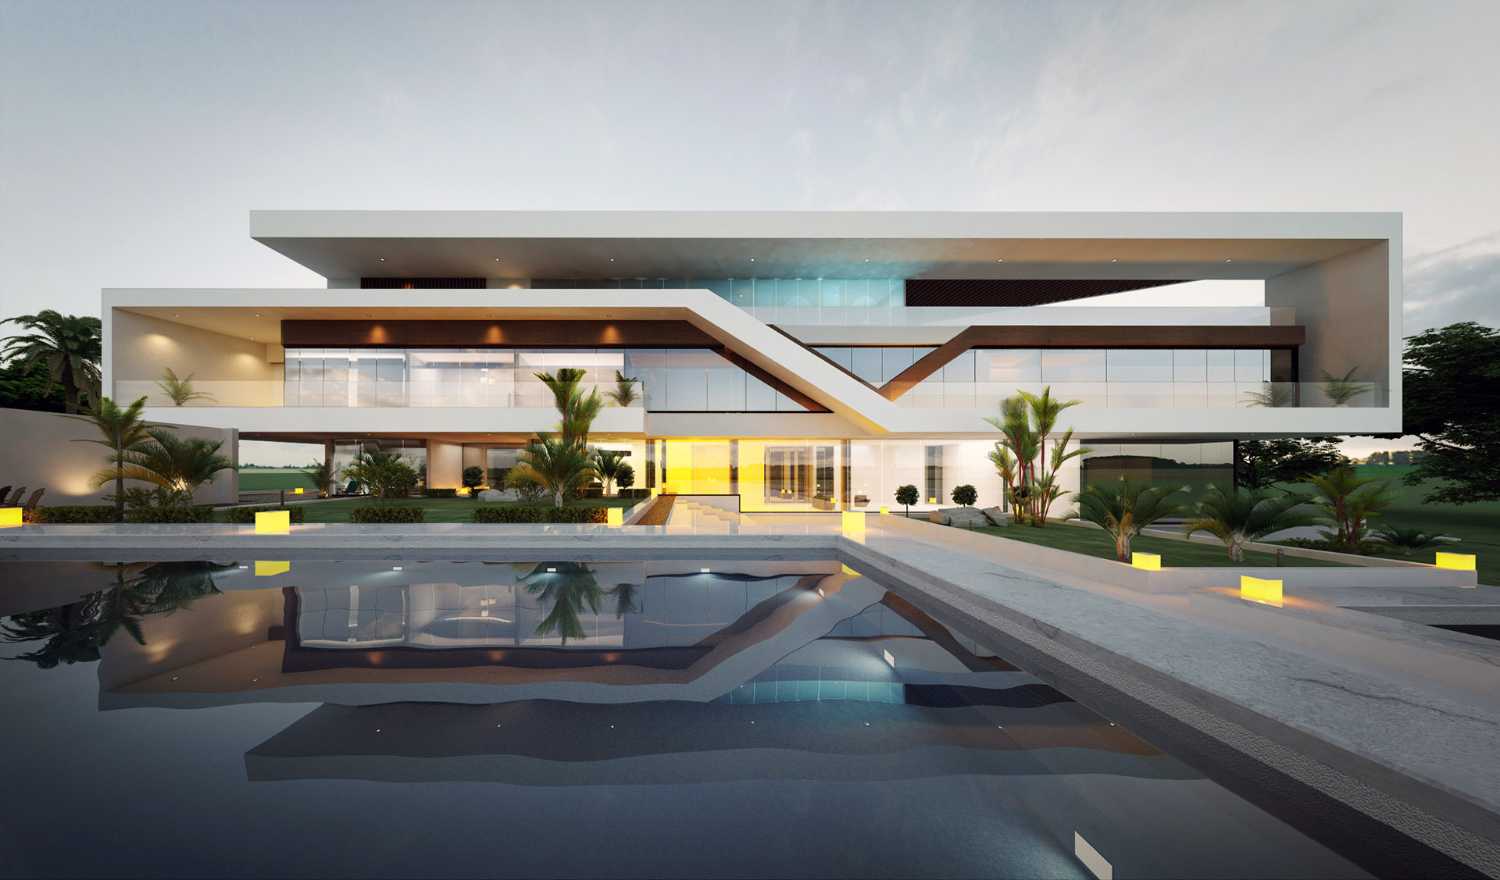 Villa in Abu Dhabi. Minimal and iconic design in a luxurious style